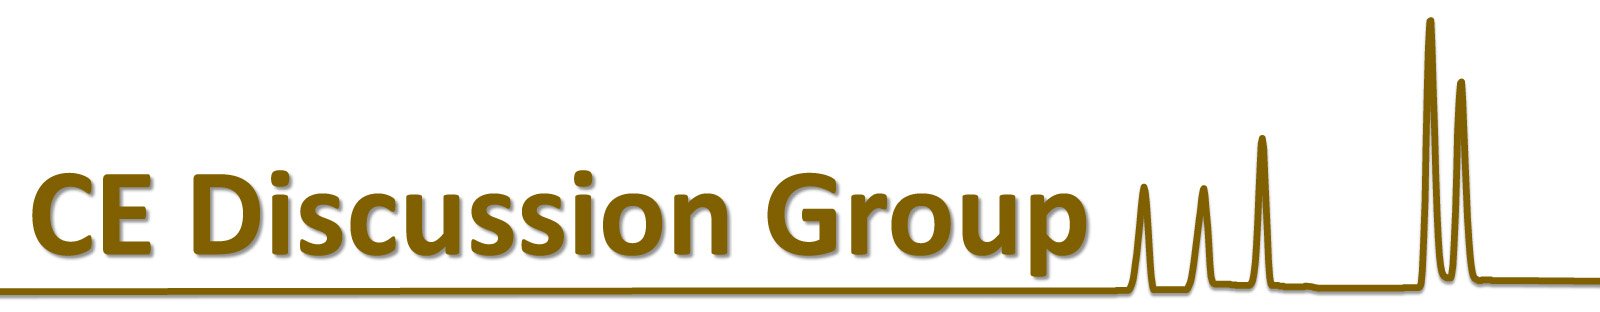 Logo gold CE discussion group-svg.jpg